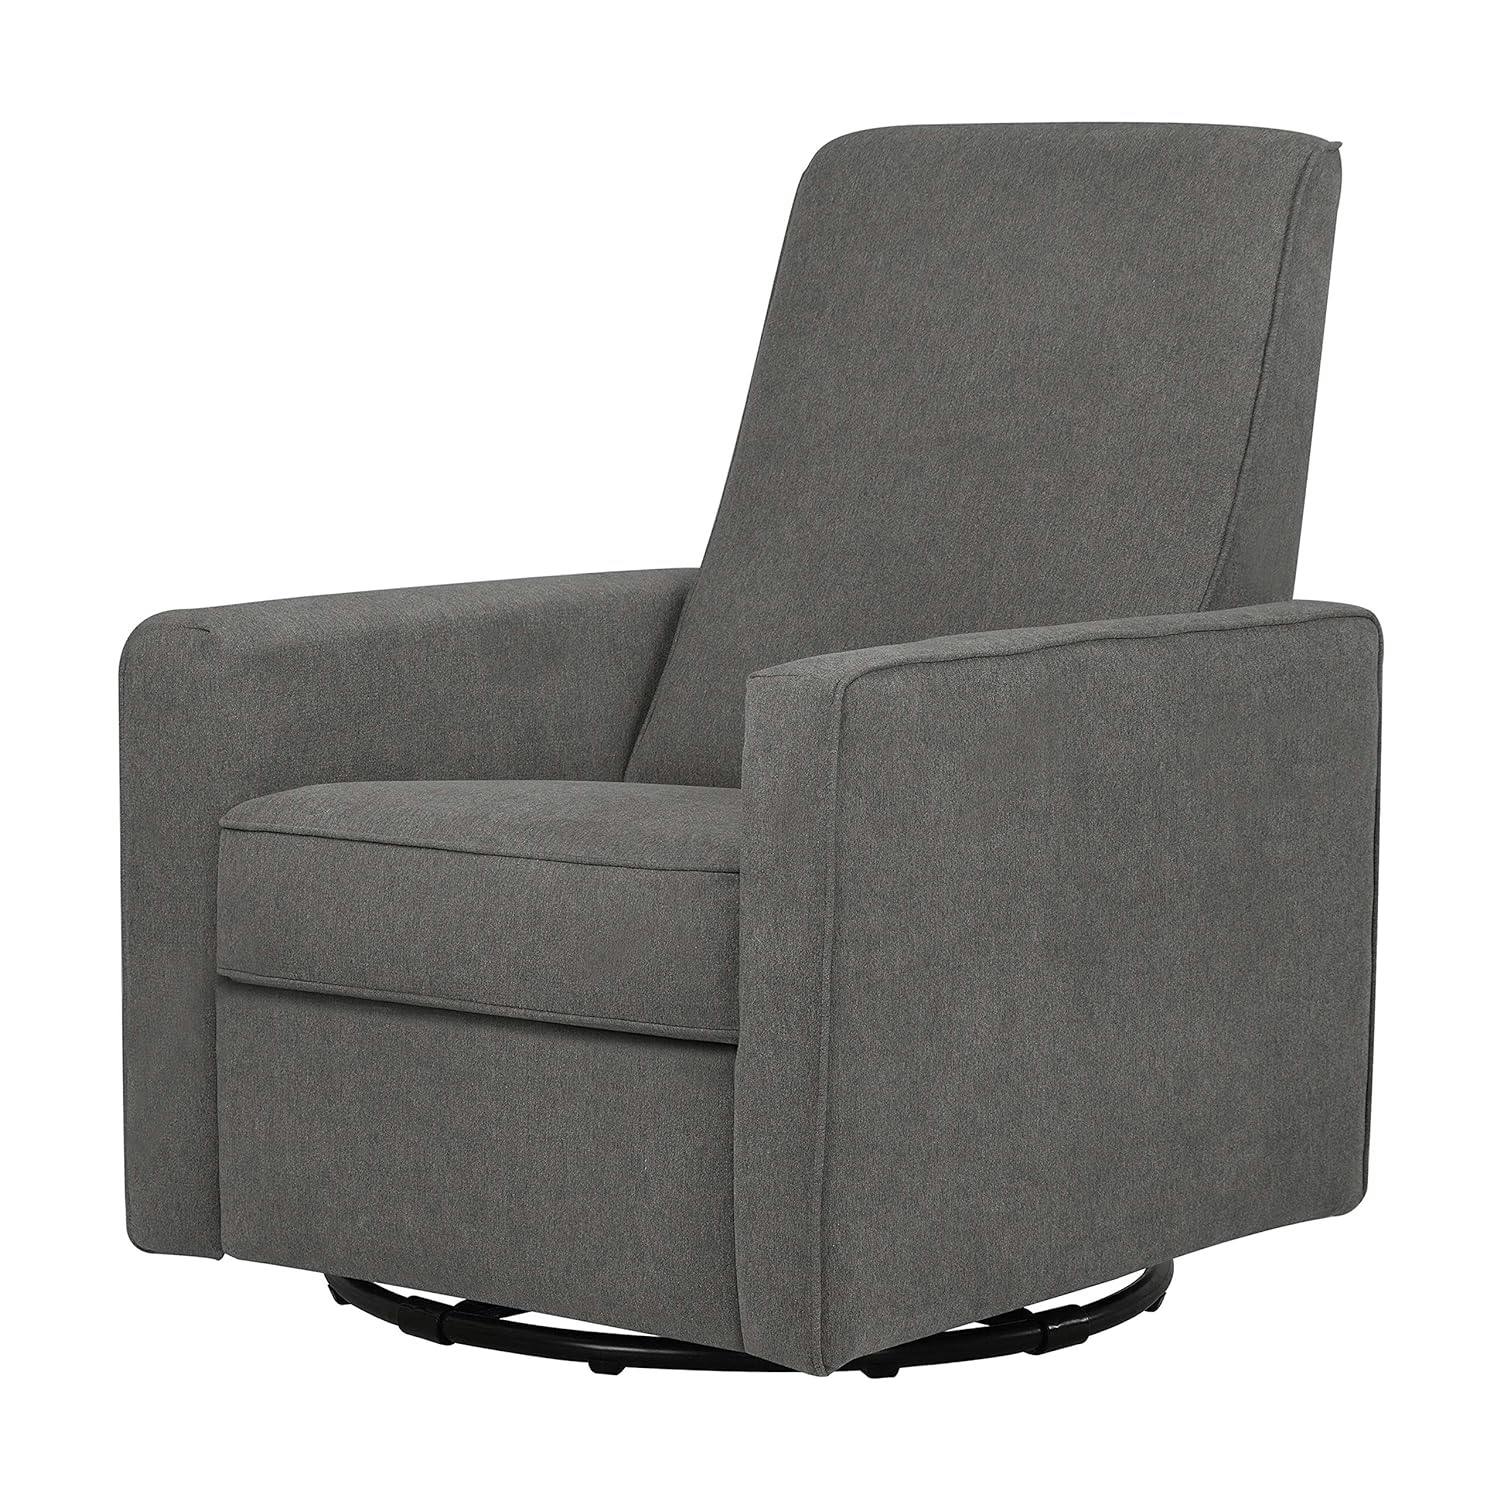 Piper Dark Grey Swivel Recliner with Plush Leg Rest and Gliding Function